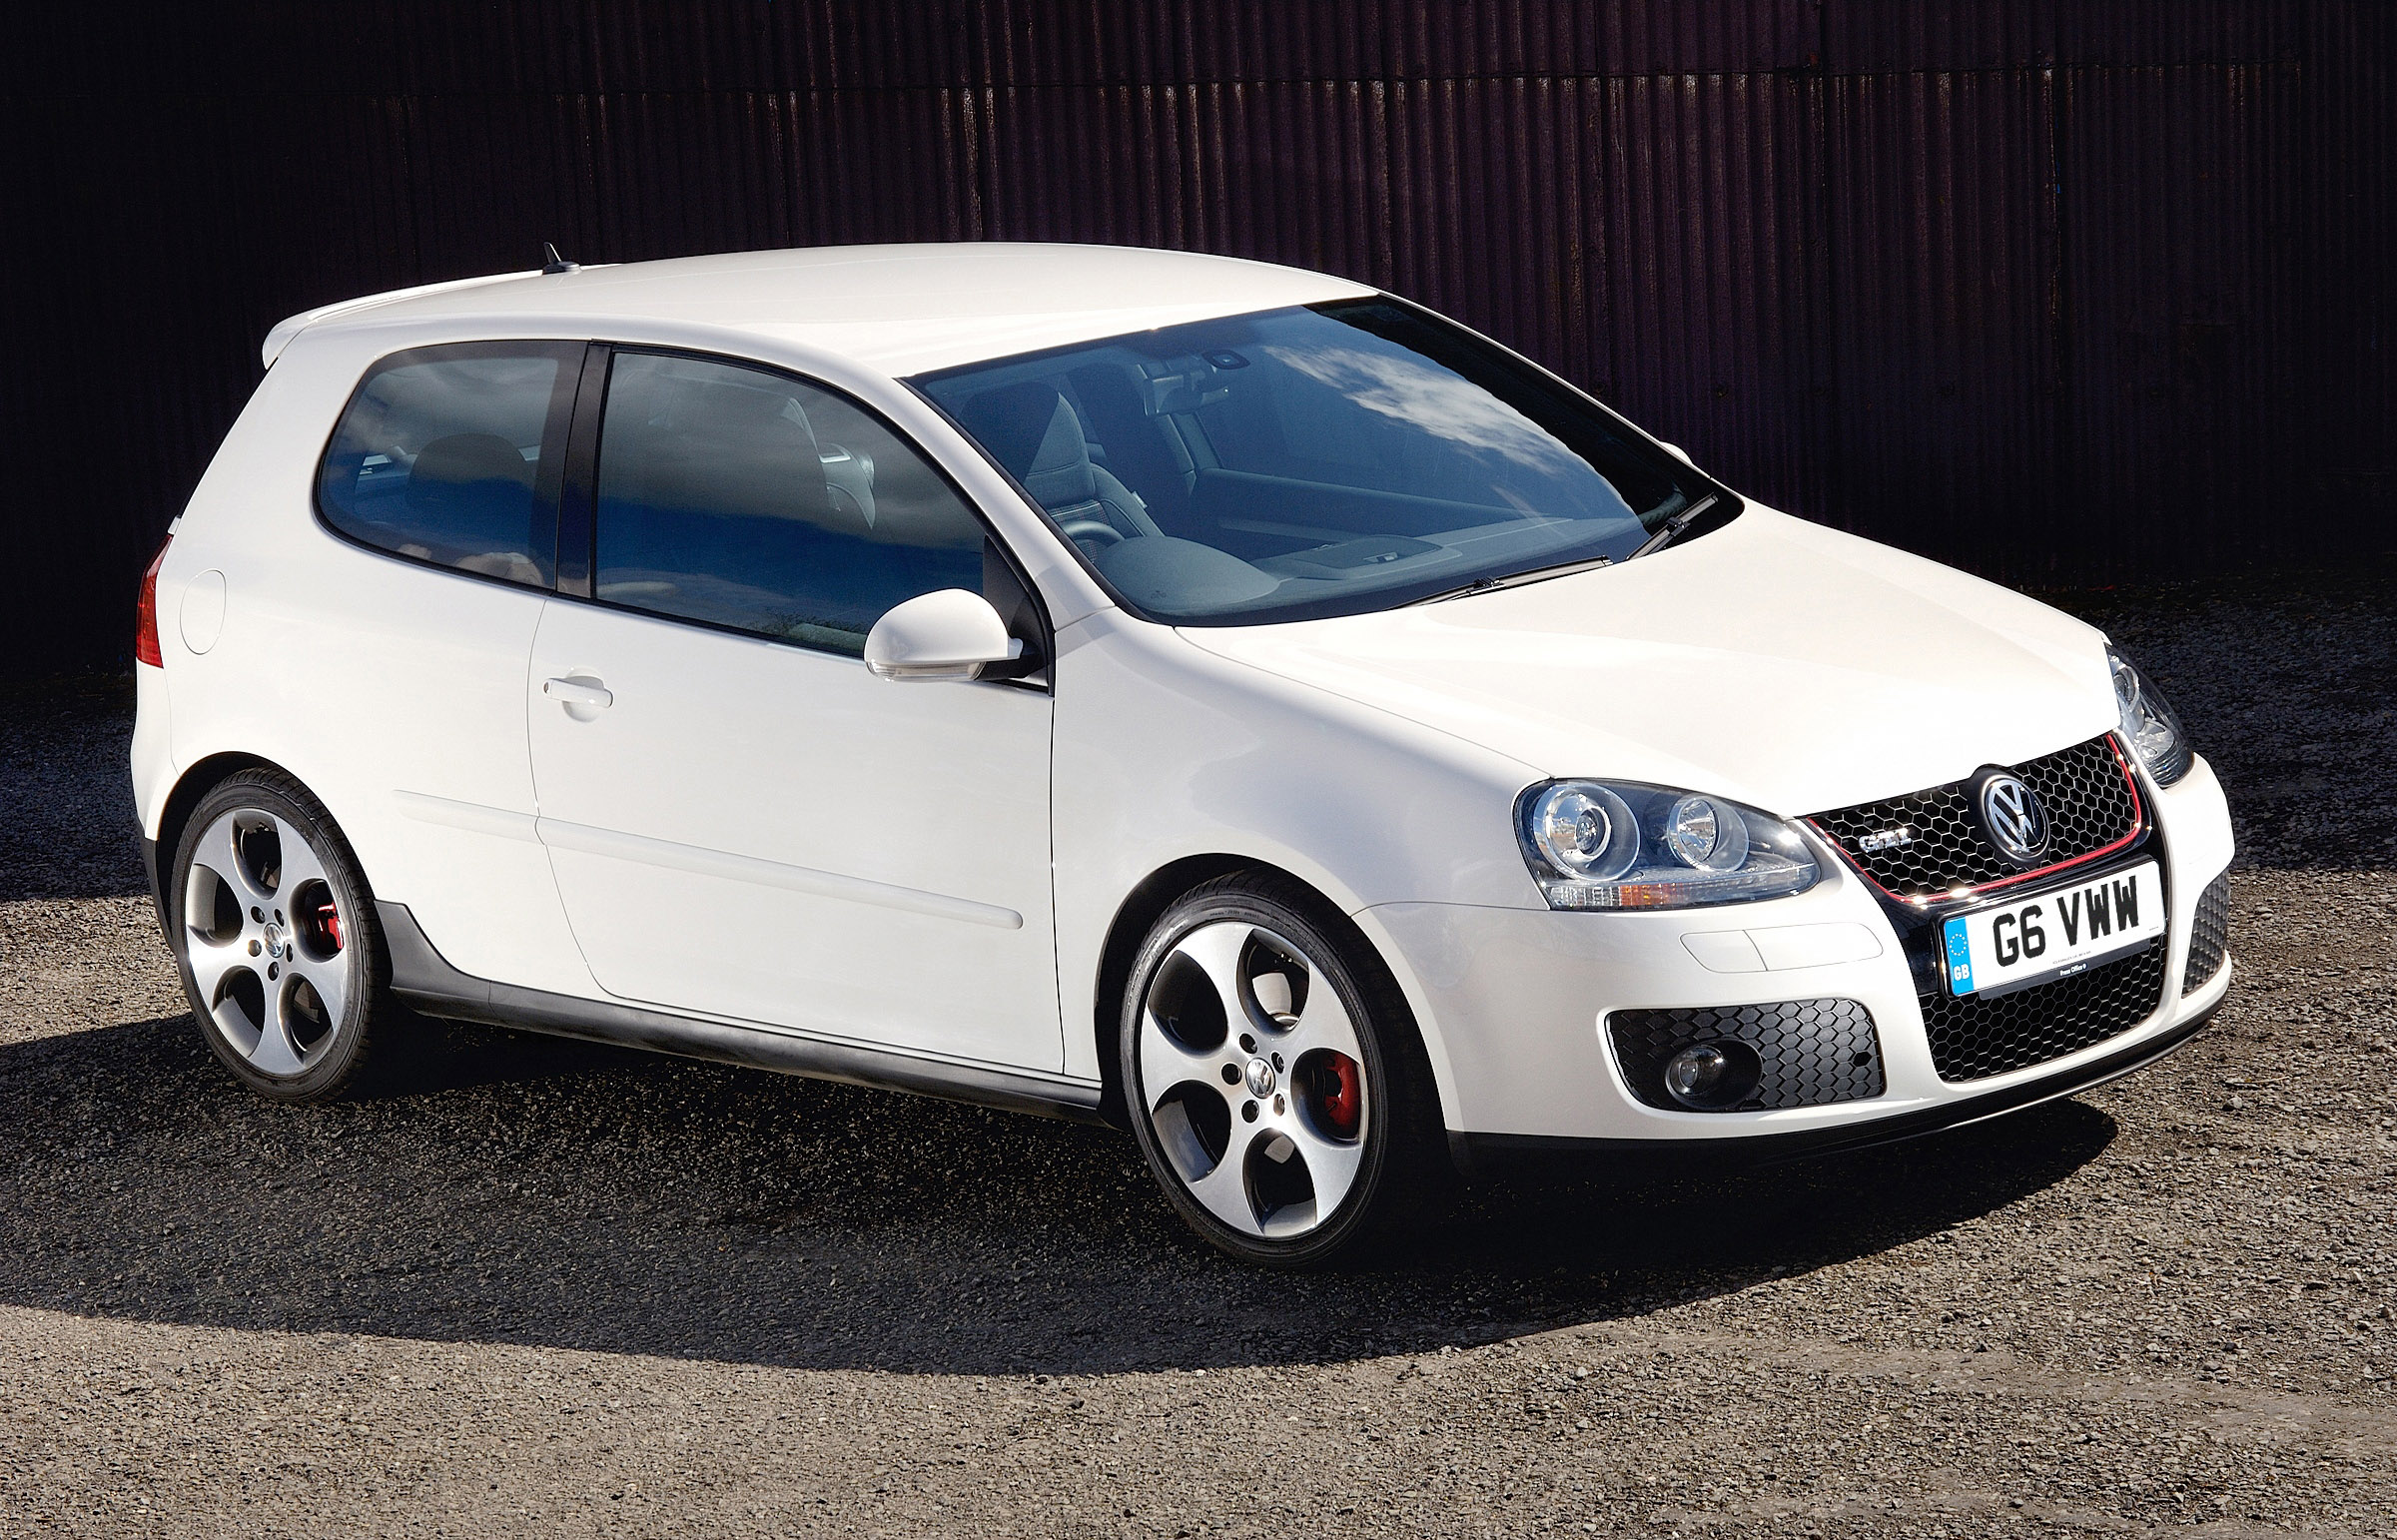 Volkswagen Golf GTI 2005 Review, Amazing Pictures and